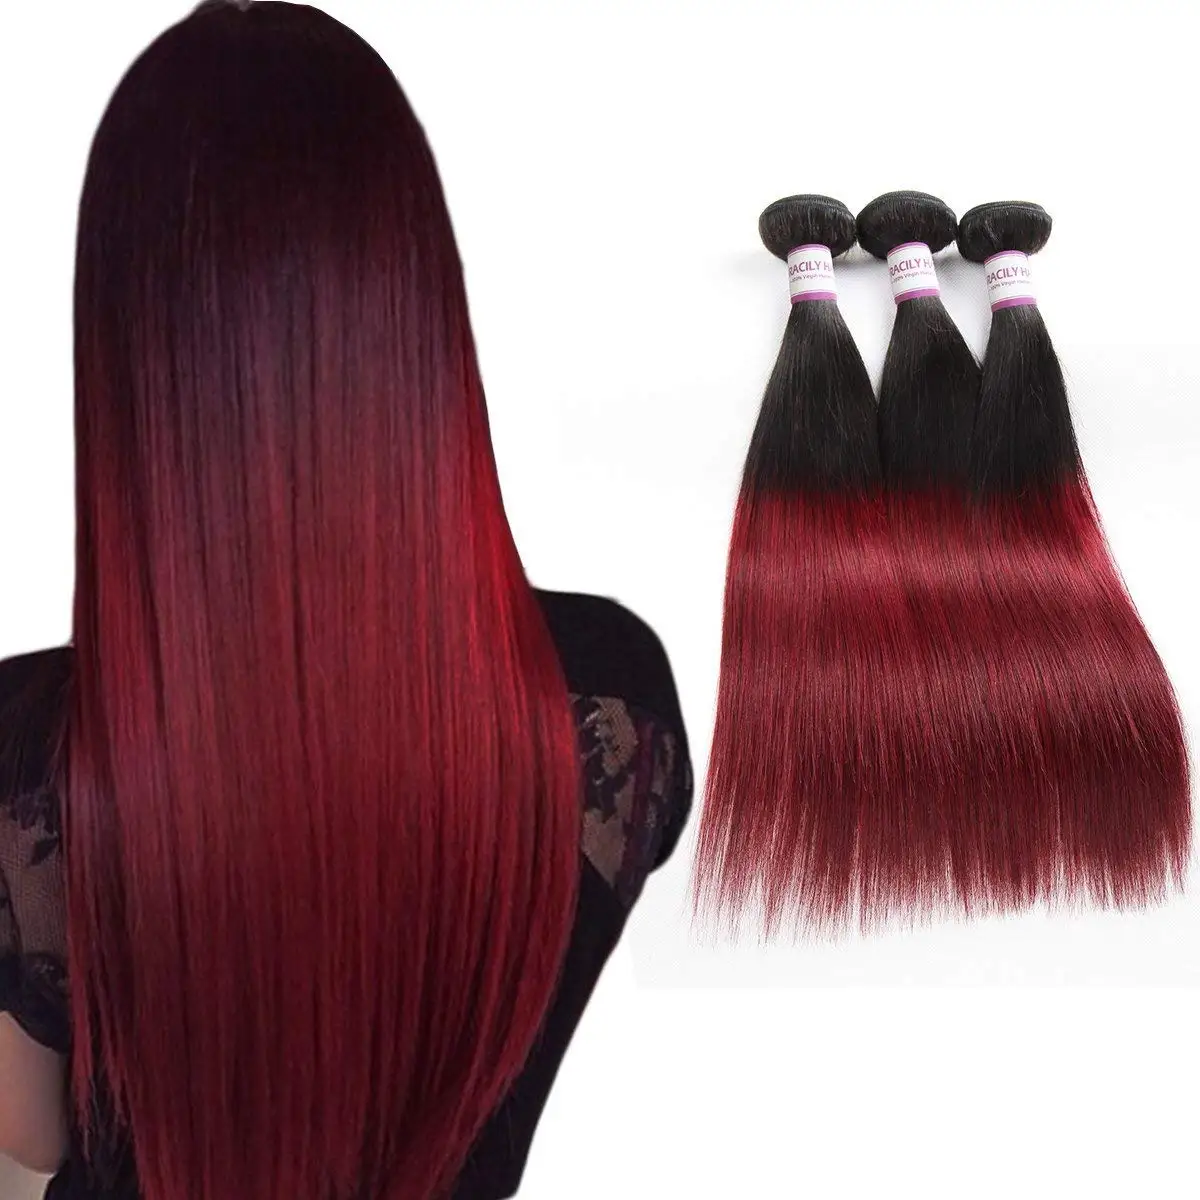 Cheap Dark Red Ombre Find Dark Red Ombre Deals On Line At